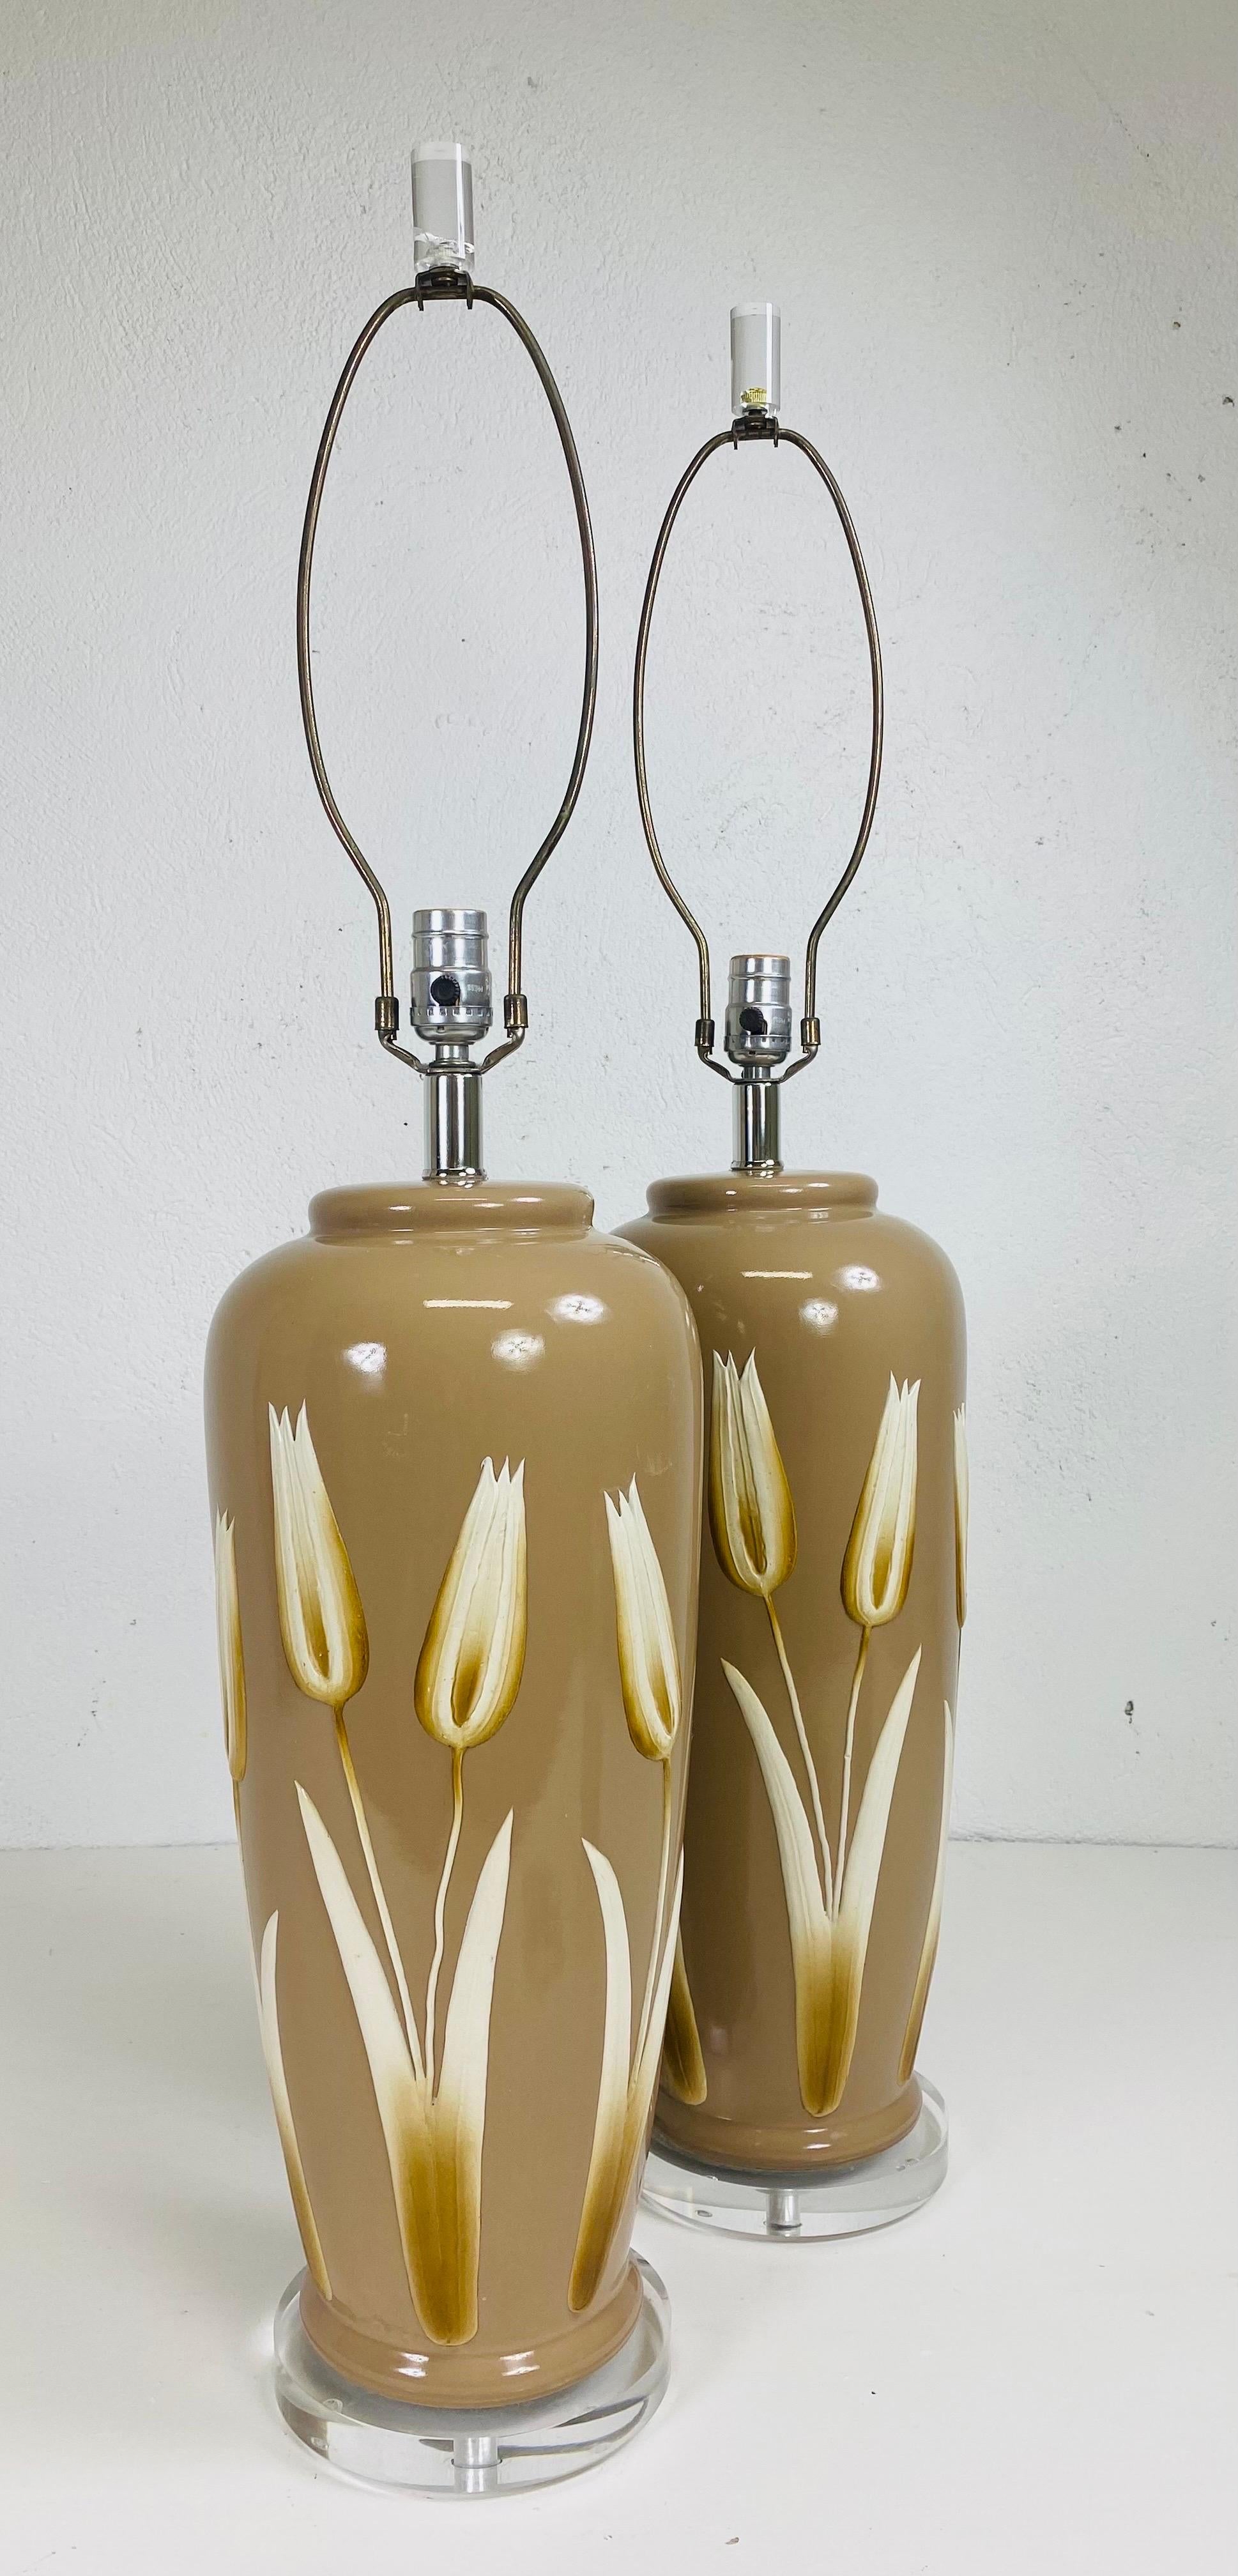 Elegant pair of mid century pottery table lamps/ pair In Good Condition For Sale In Allentown, PA